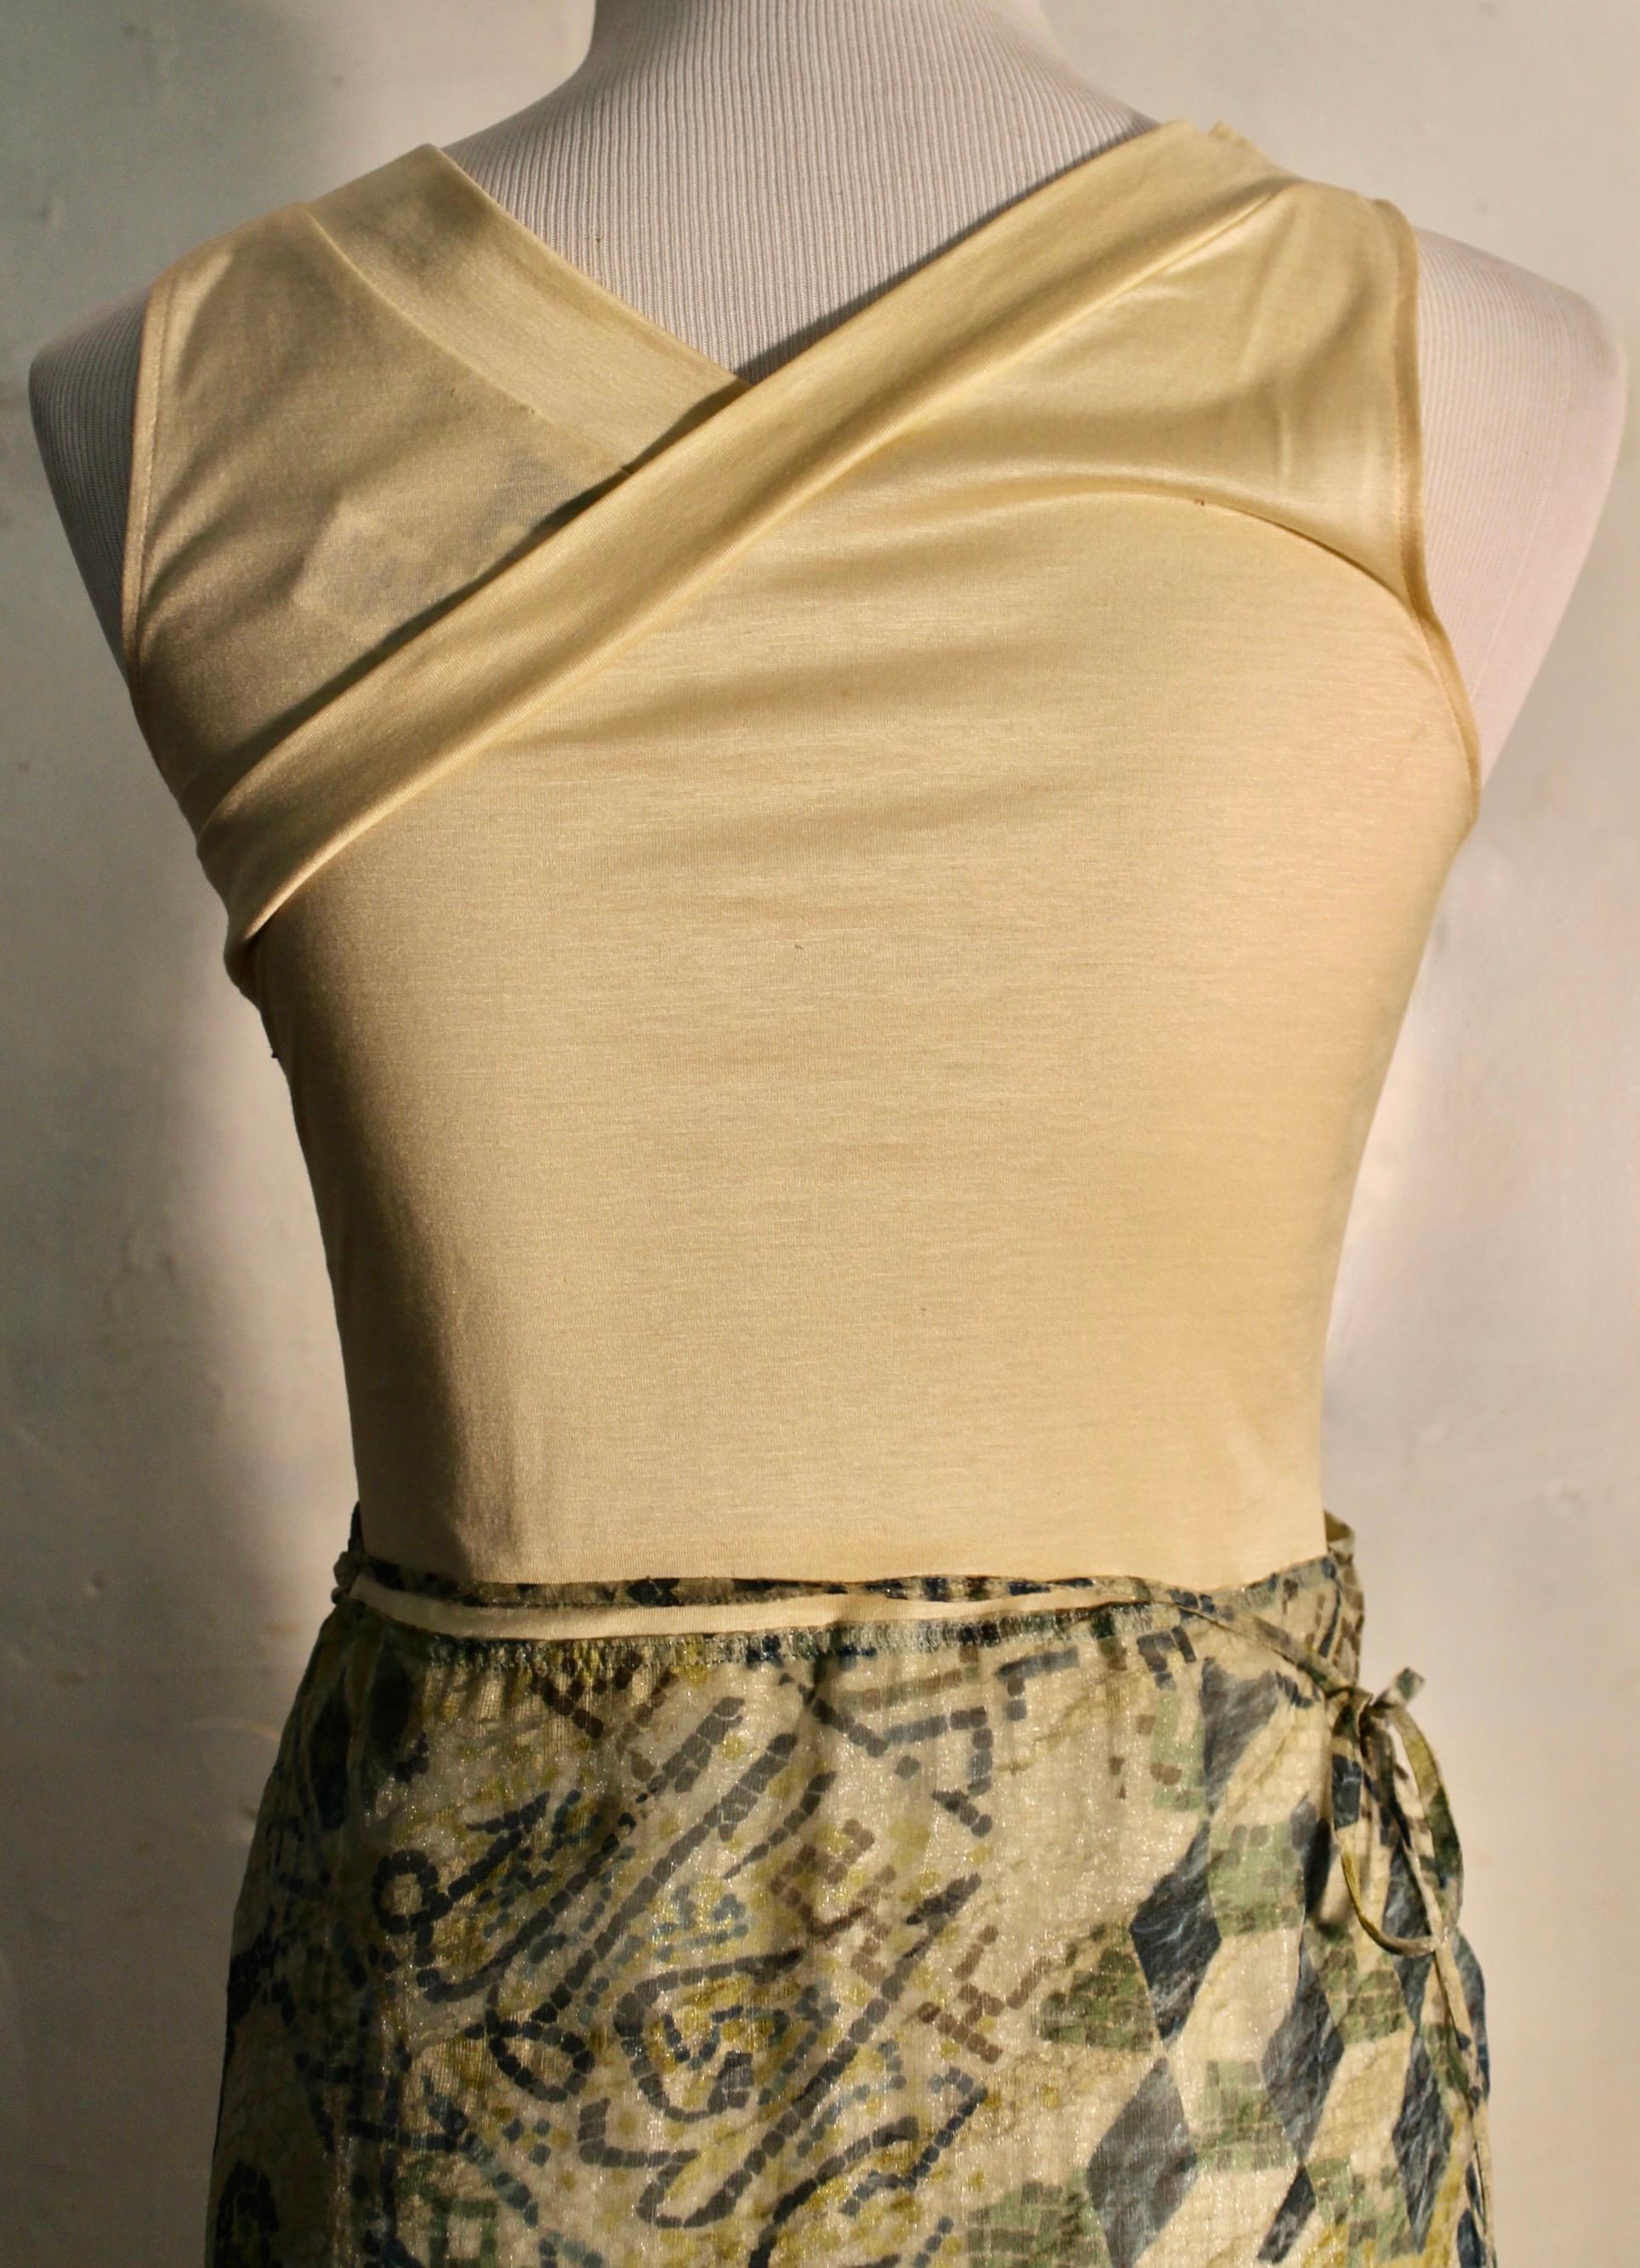 Kenzo Takada Wraparound Skirt Dress In Excellent Condition For Sale In Sharon, CT